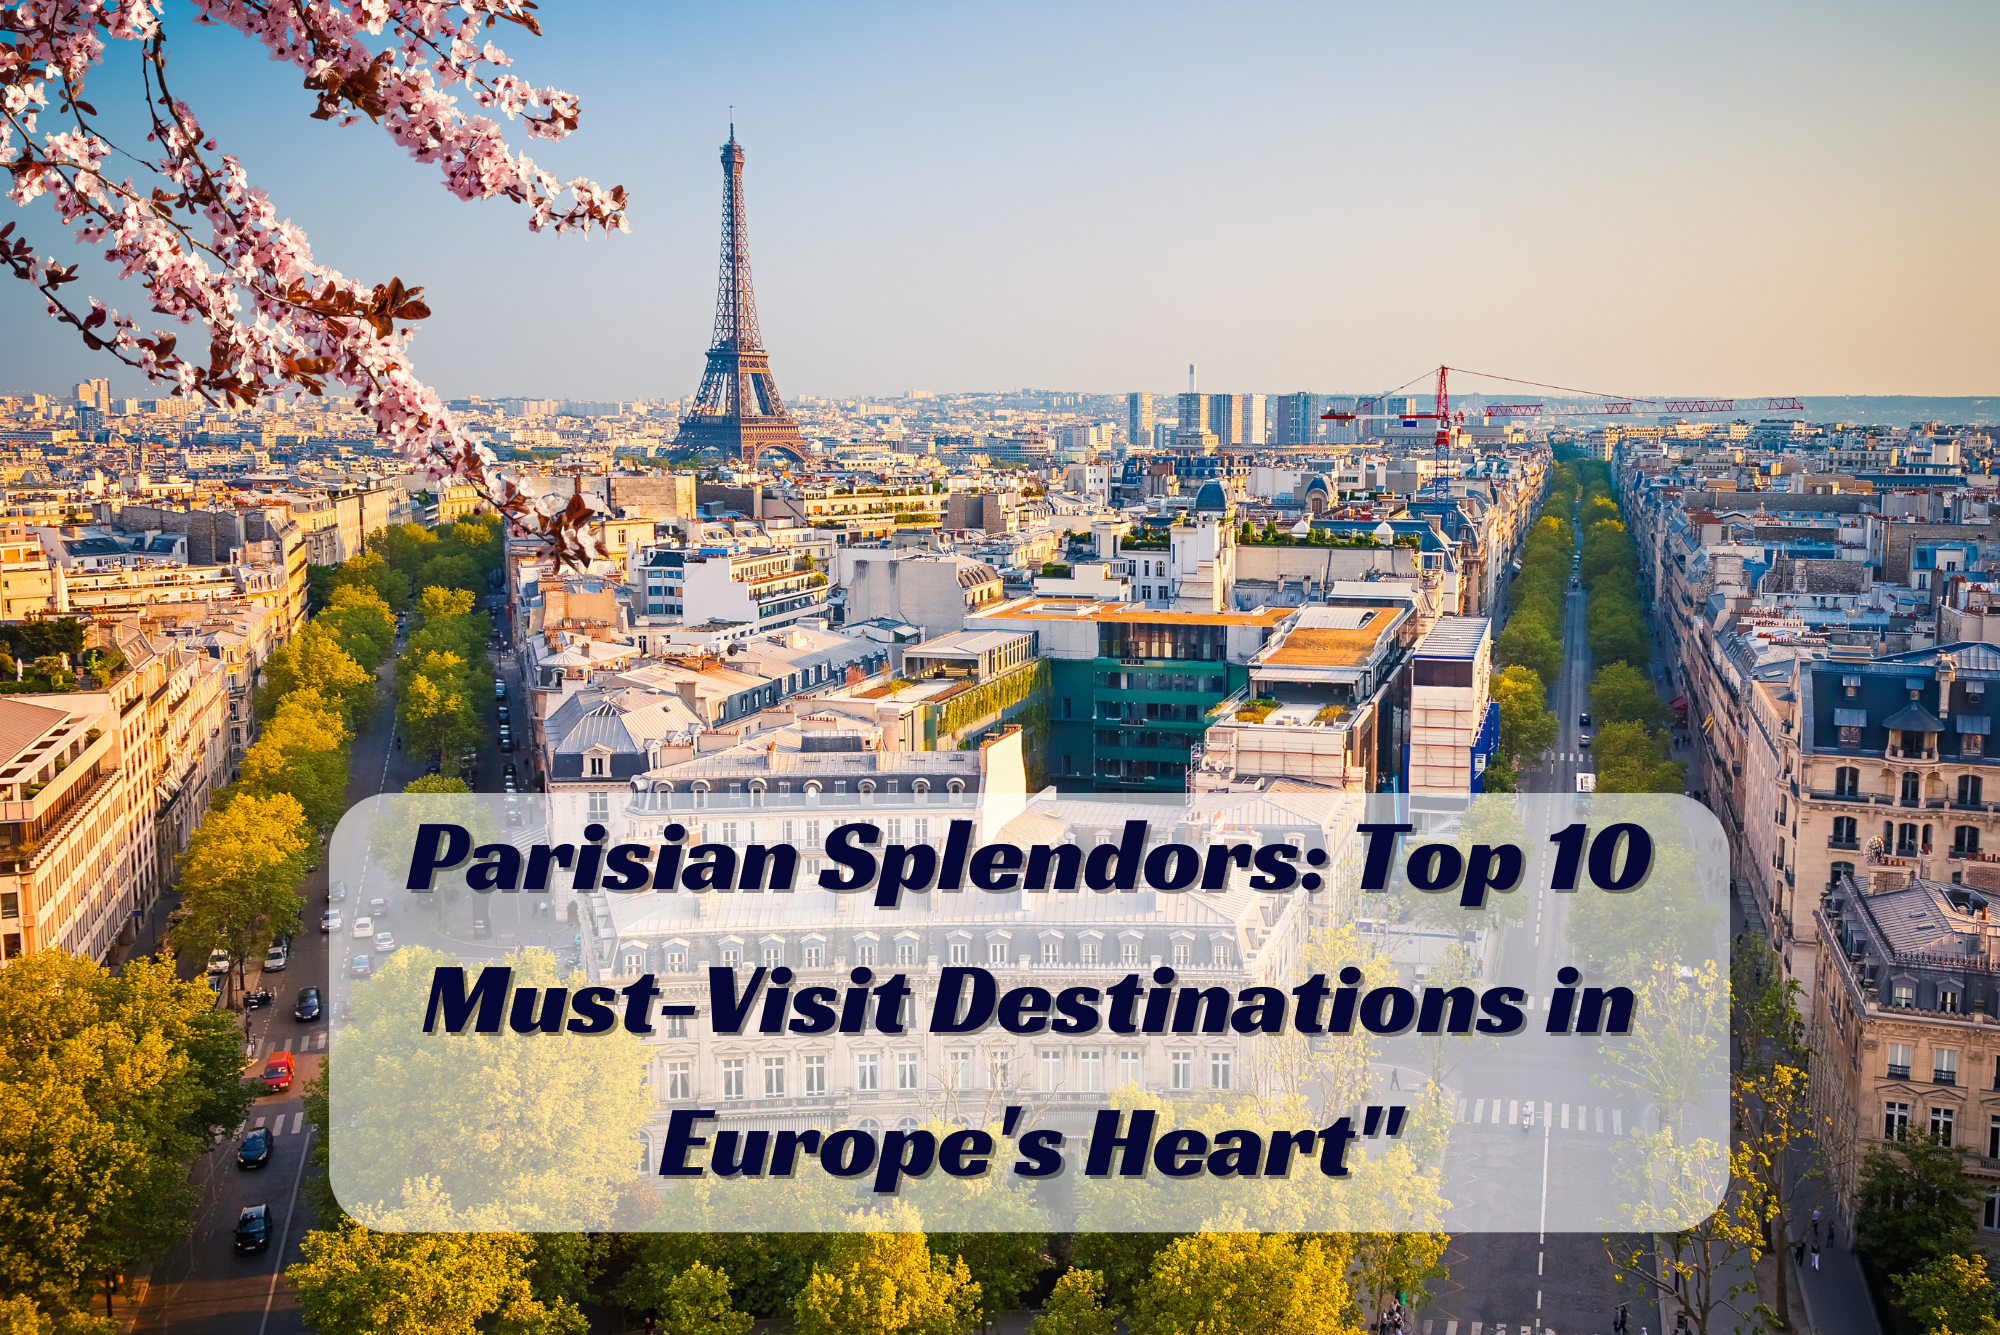 Explore the Top 10 Places to Visit in Paris with Unforgettable Travel Experiences”